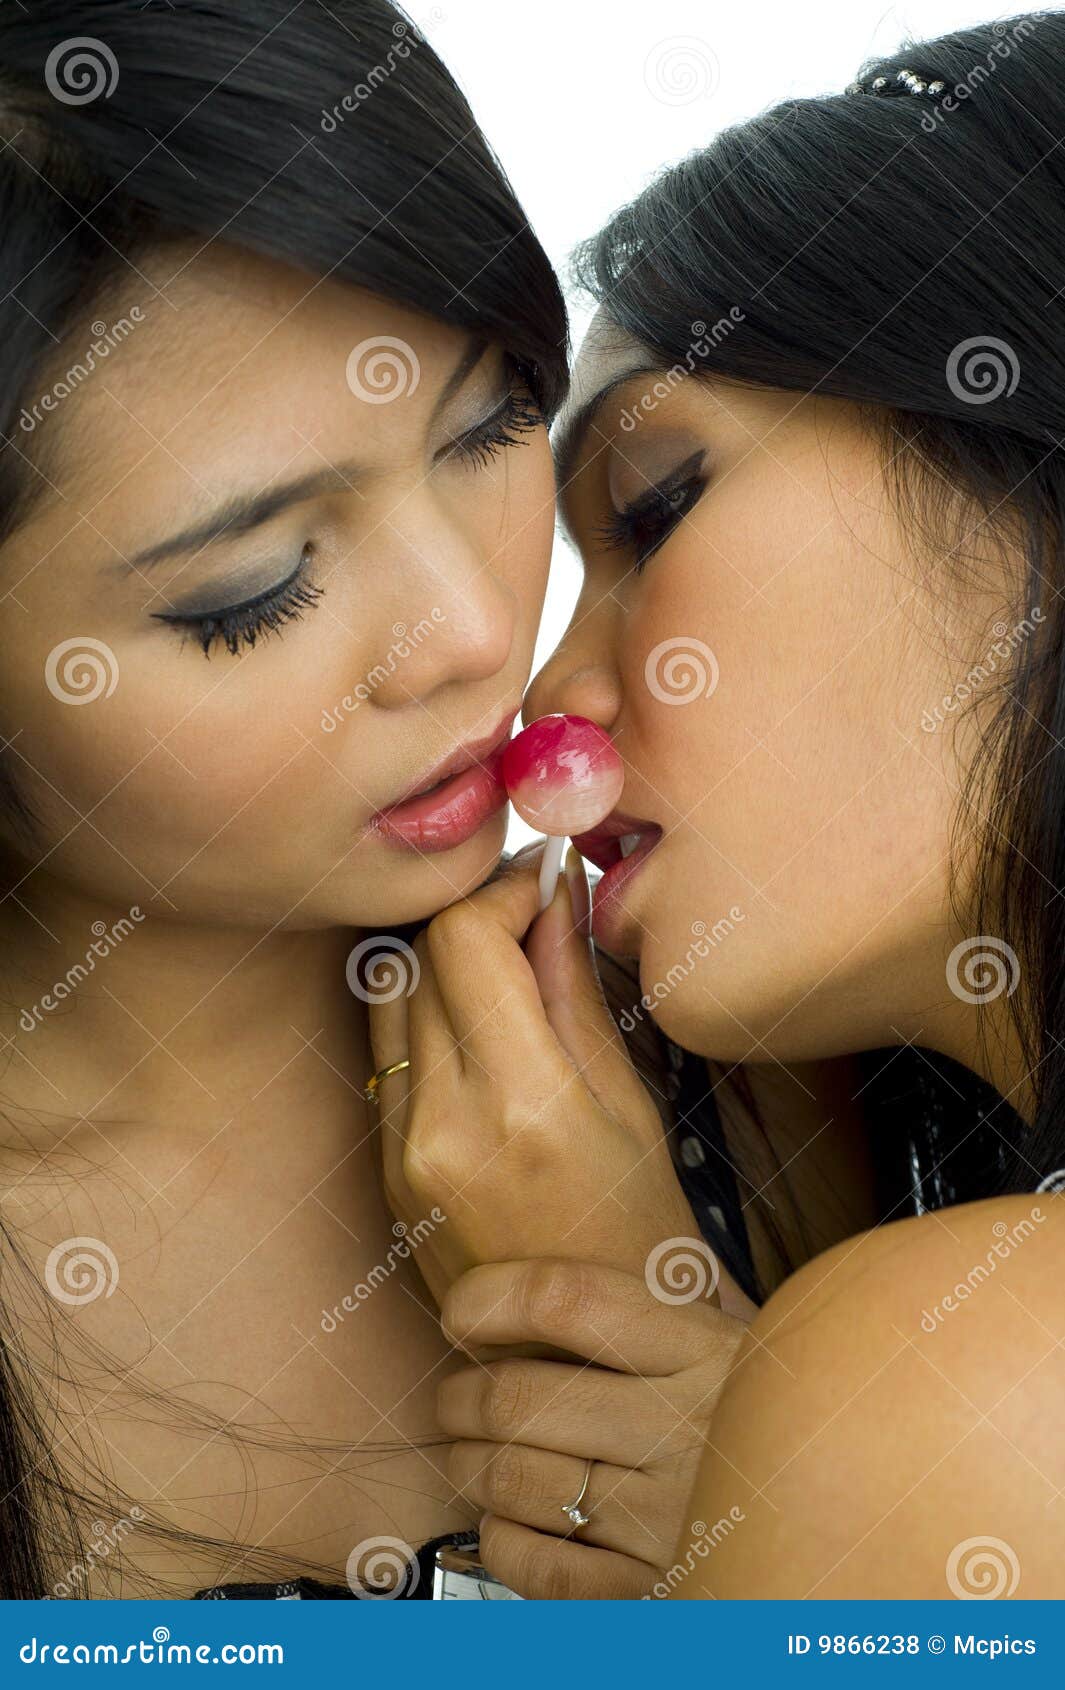 Asian Lesbians Making Out